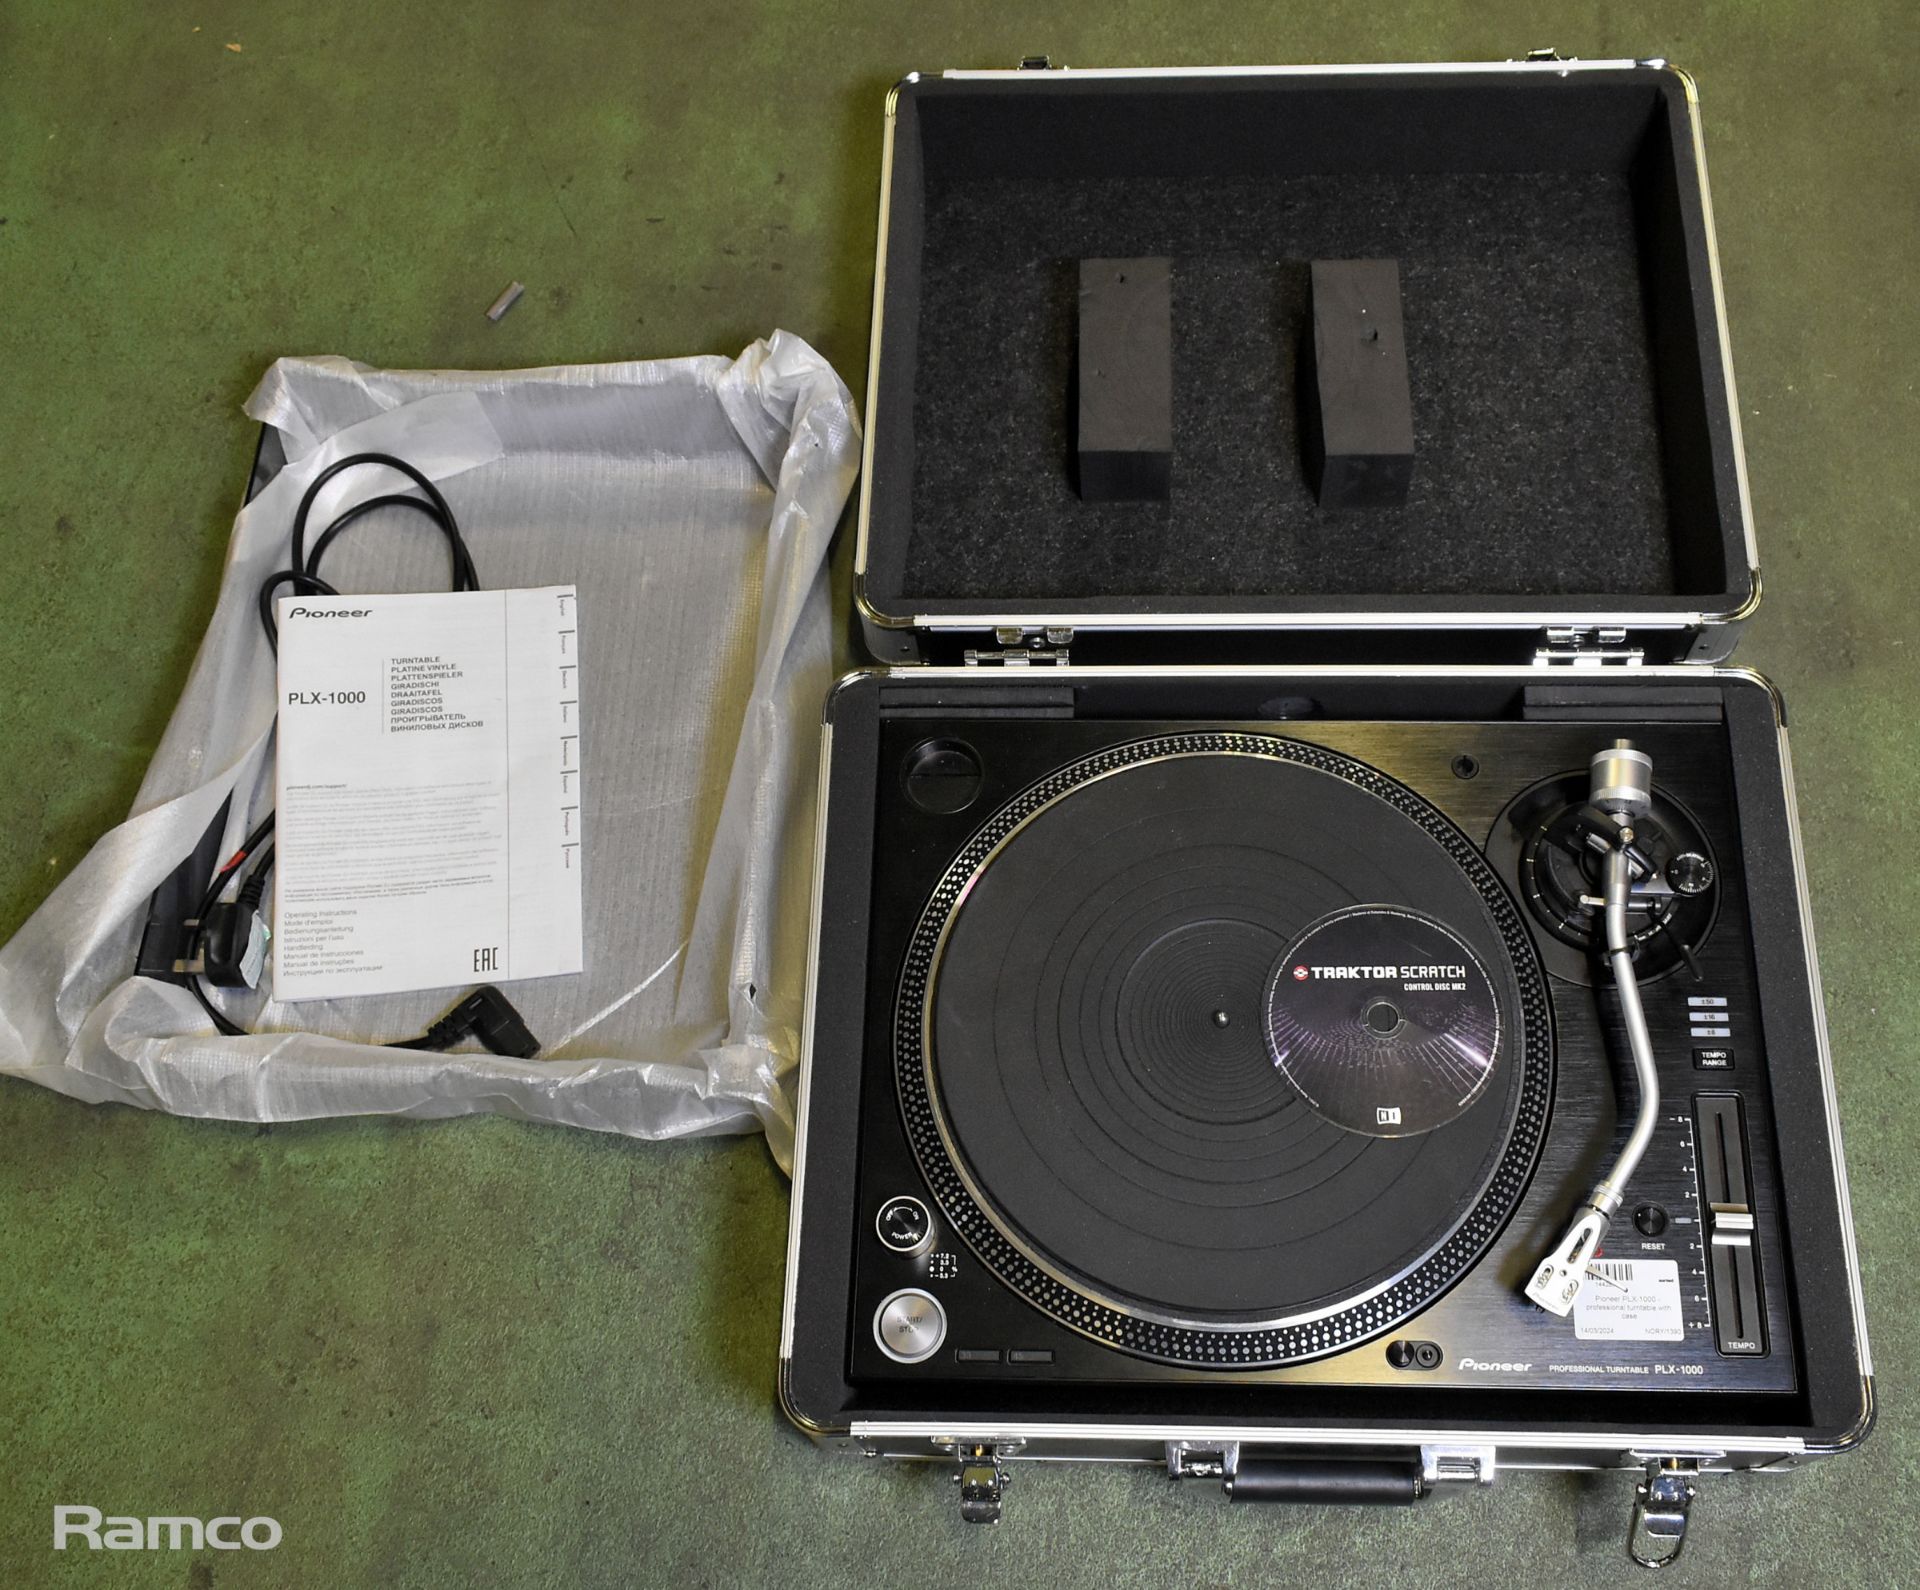 Pioneer PLX-1000 professional turntable with case - Image 10 of 15